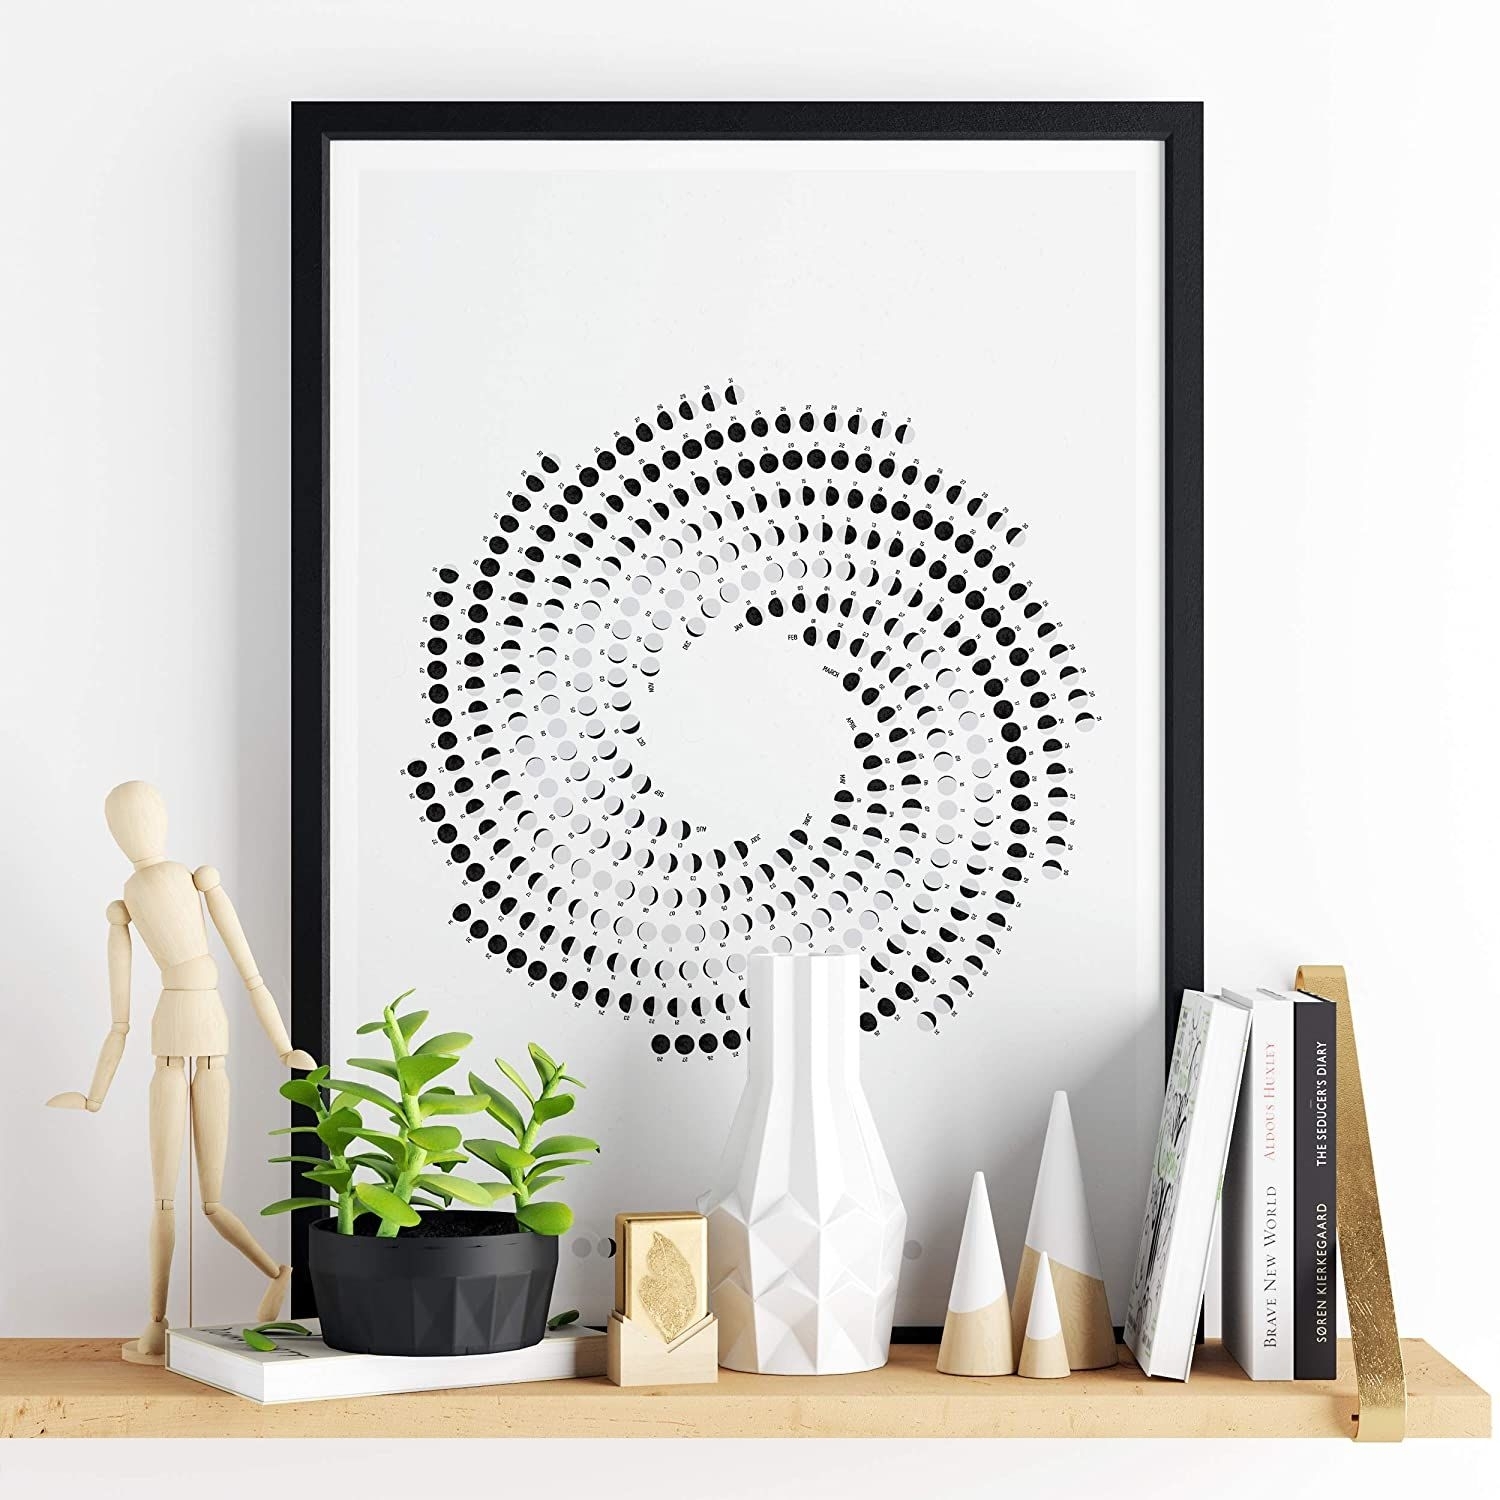 2021 Lunar Calendar With Phases Of Moon On A Spiral Layout